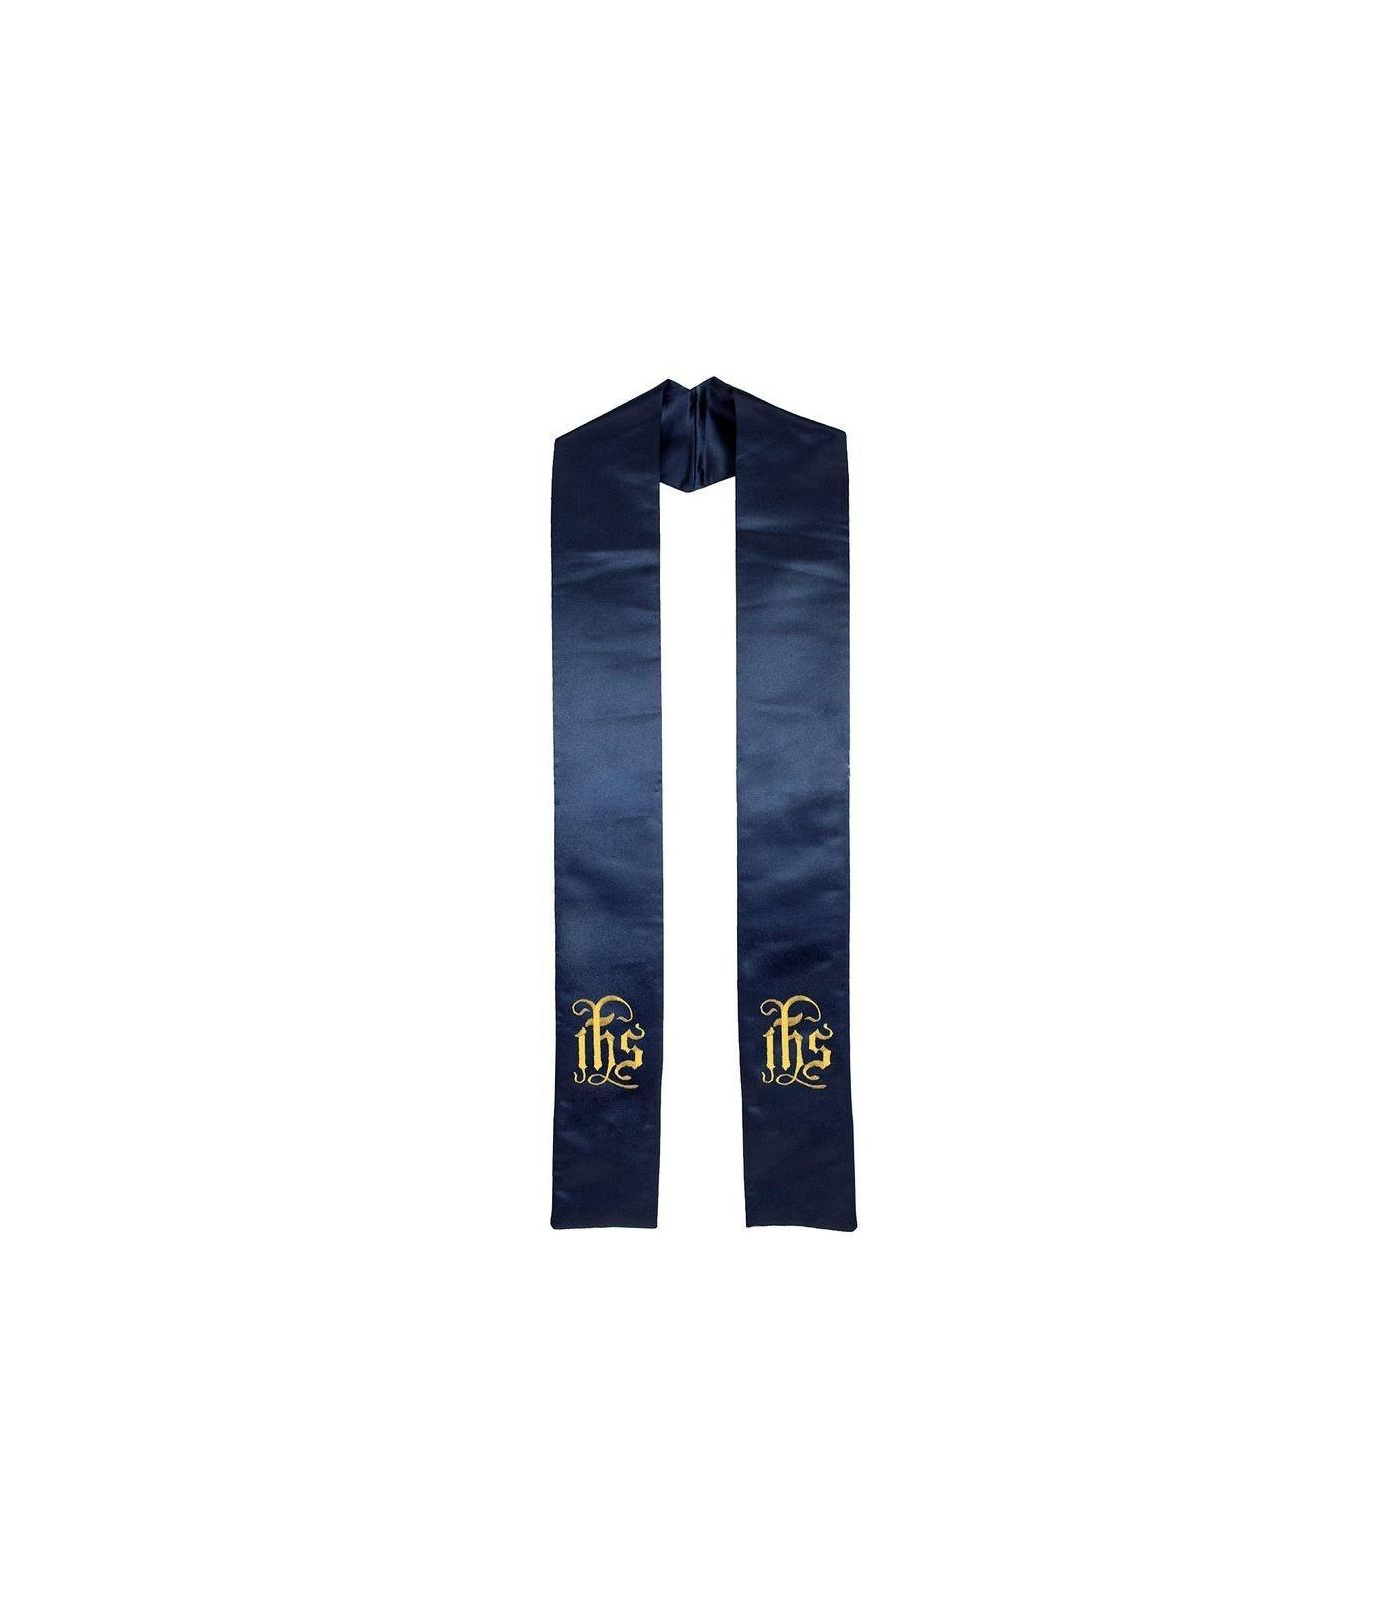 name_of_christ_symbol_-_in_his_service_-_navy_blue_1_290117797